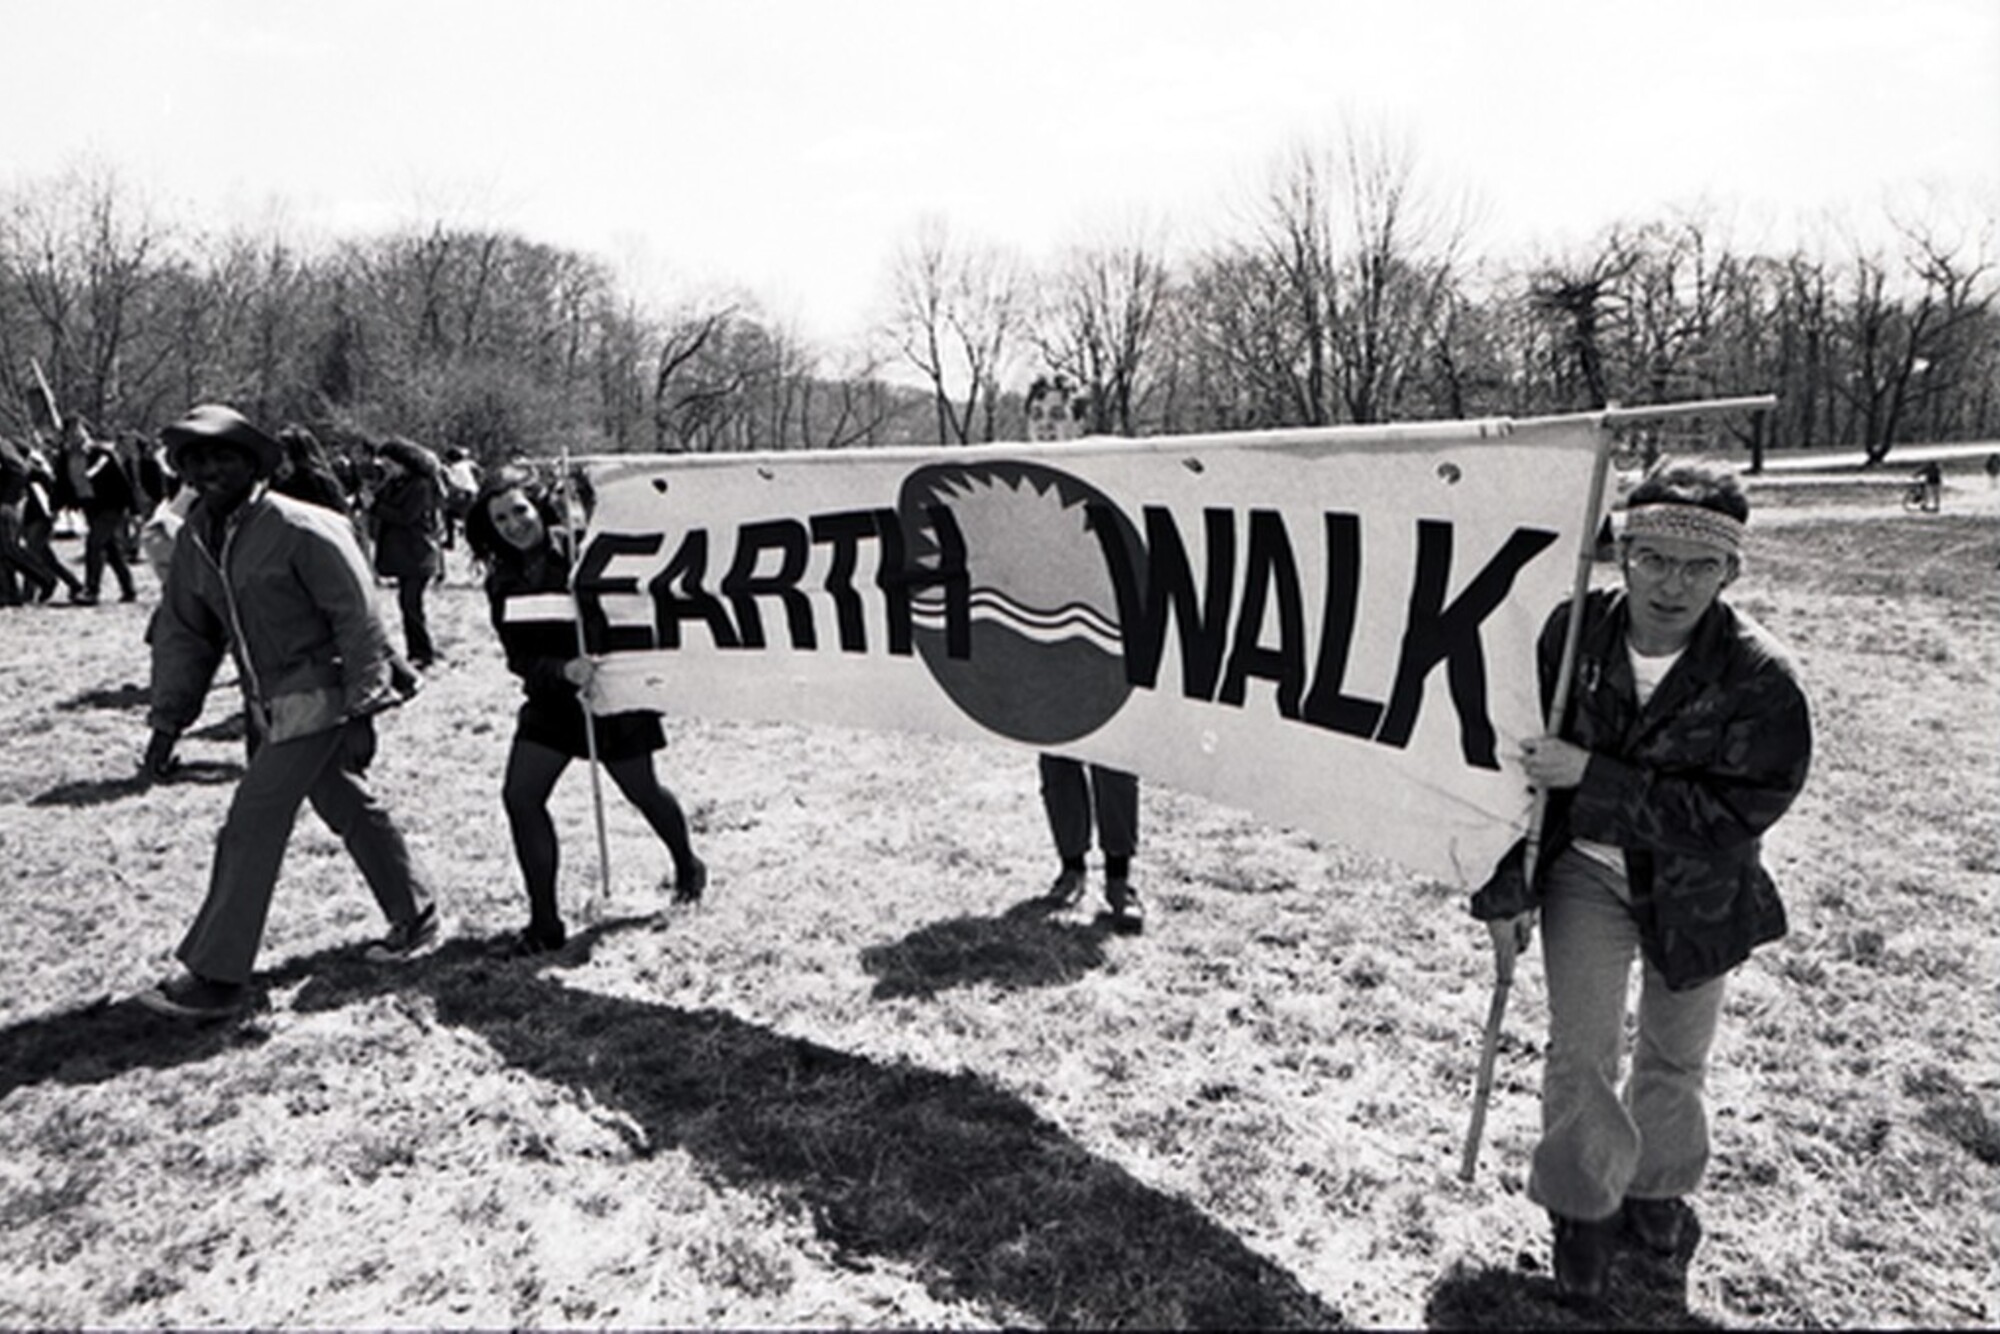 People walking in a park hold a banner reading "Earth Walk"